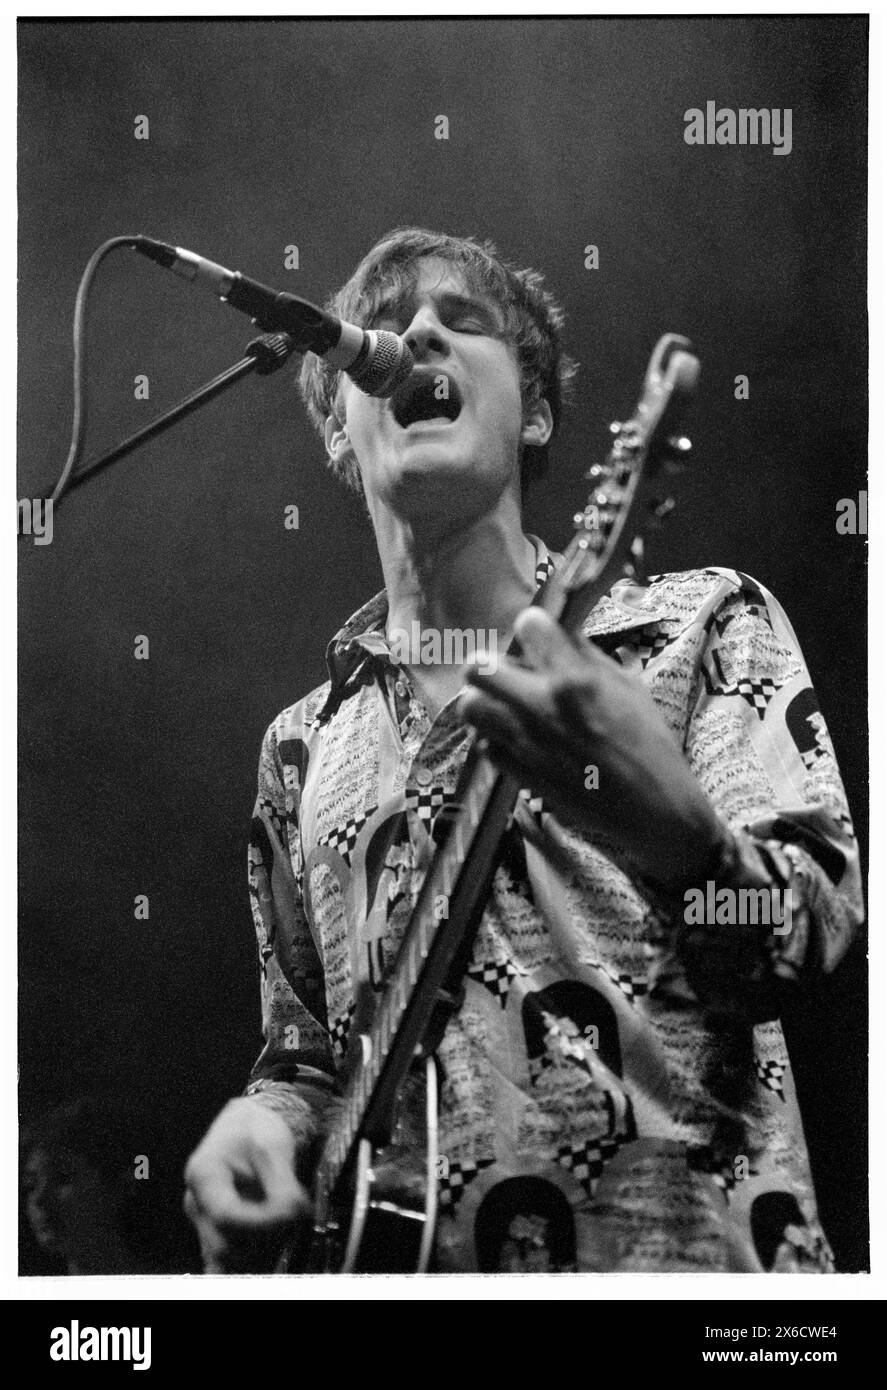 CRISPIN HUNT, LONGPIGS, 1996: Crispin Hunt of Longpigs playing live at Newport Centre in Newport, Wales, UK on 2 June 1996. Photo: Rob Watkins.  INFO: Longpigs, a British alternative rock band formed in Sheffield in 1994, gained recognition with their debut album 'The Sun Is Often Out.' Hits like 'She Said' showcased their melodic sound and poignant lyrics, earning them a devoted following in the '90s music scene. Stock Photo